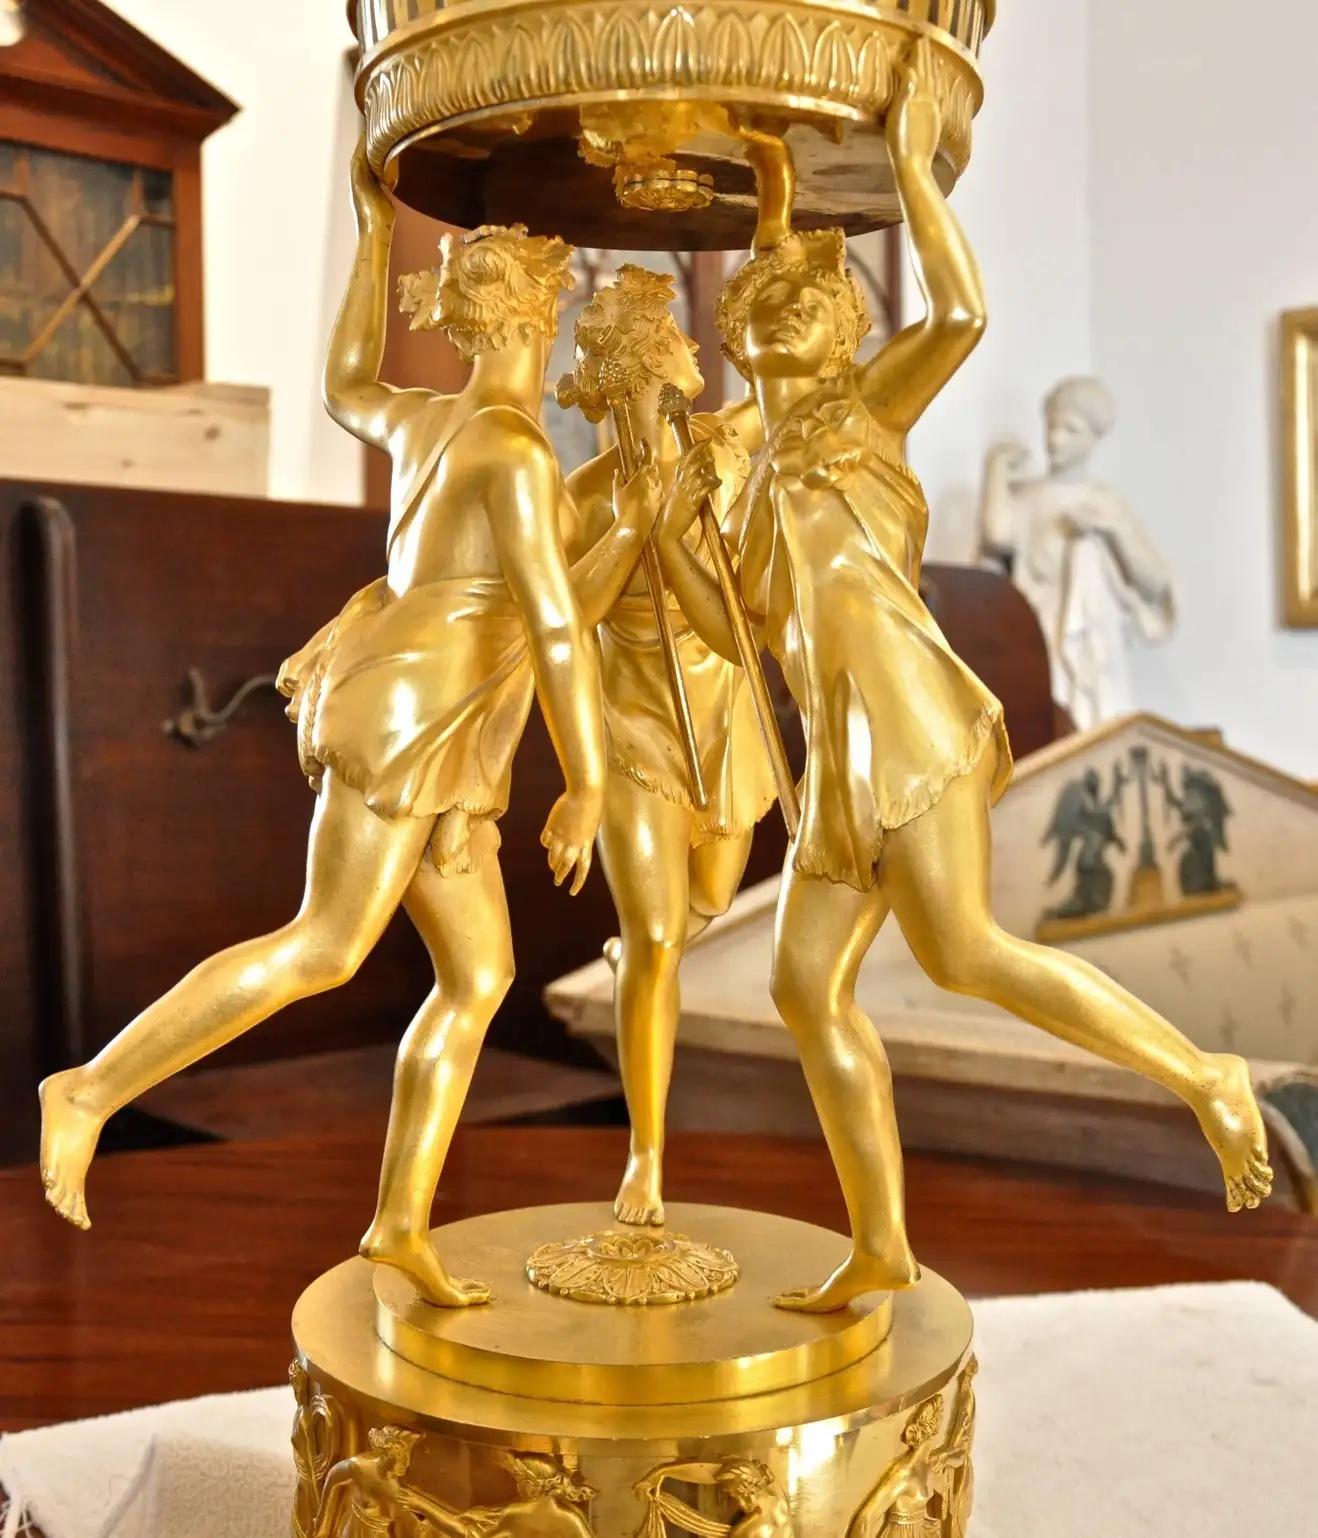 Period first Empire neoclassical ormolu centrepiece by and signed Thomire

Three maenads carrying staffs in dance
Reticulated basket
Amazing dull and shiny gilding
Laurel wreath base.